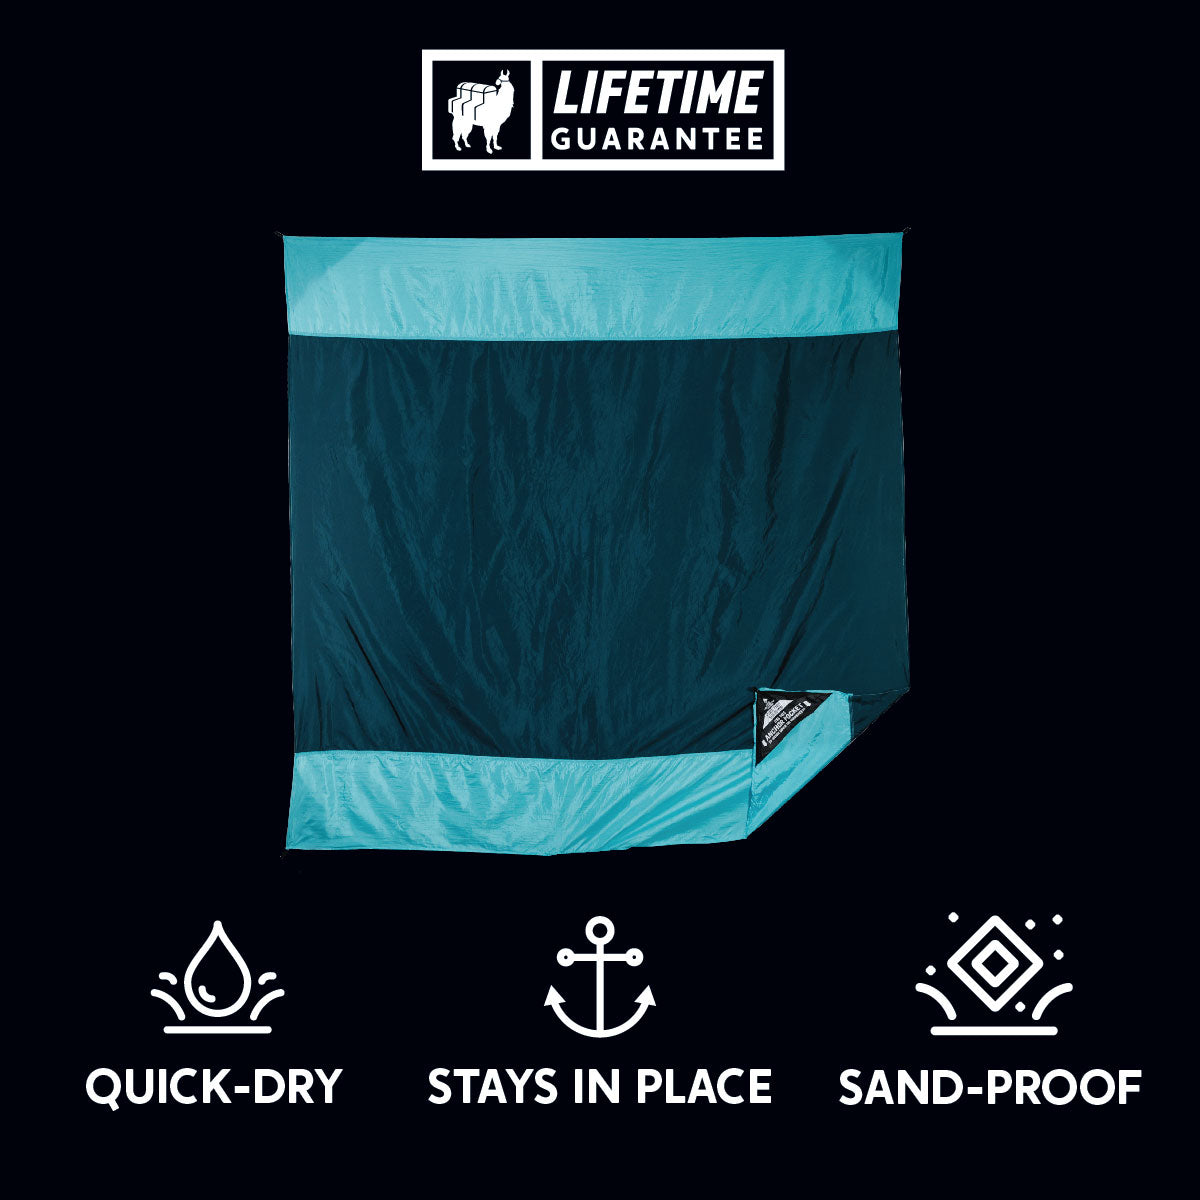 quick-dry, sand-proof, anchored lightweight beach sheet for sitting and keeping gear protected and dry. Lifetime Guarantee